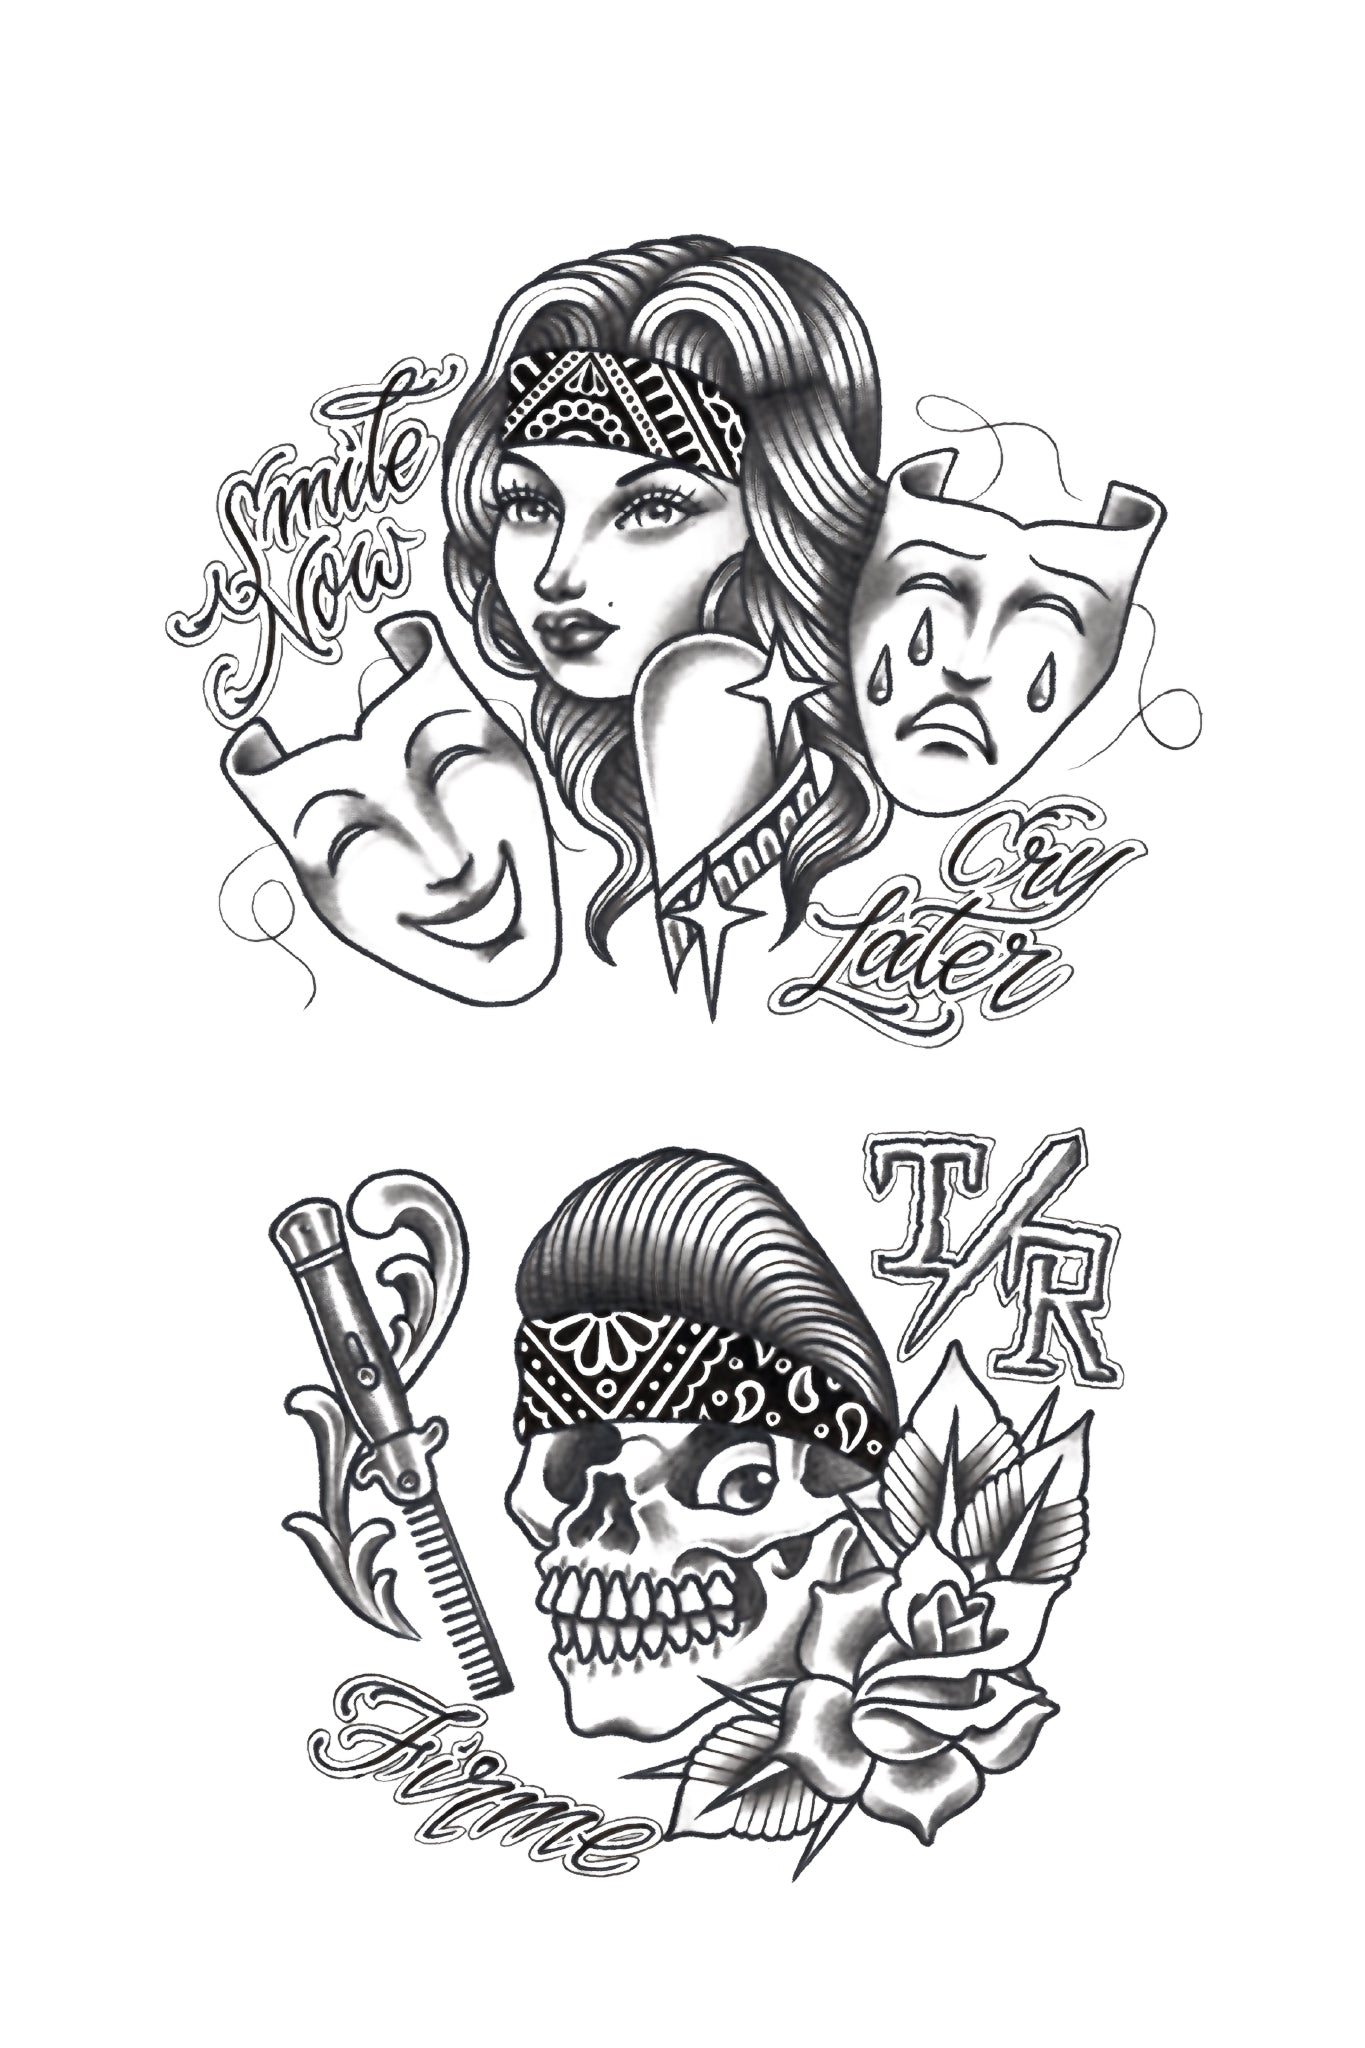 Create a tattoo design of your tattoo sleeve by Diankrige | Fiverr